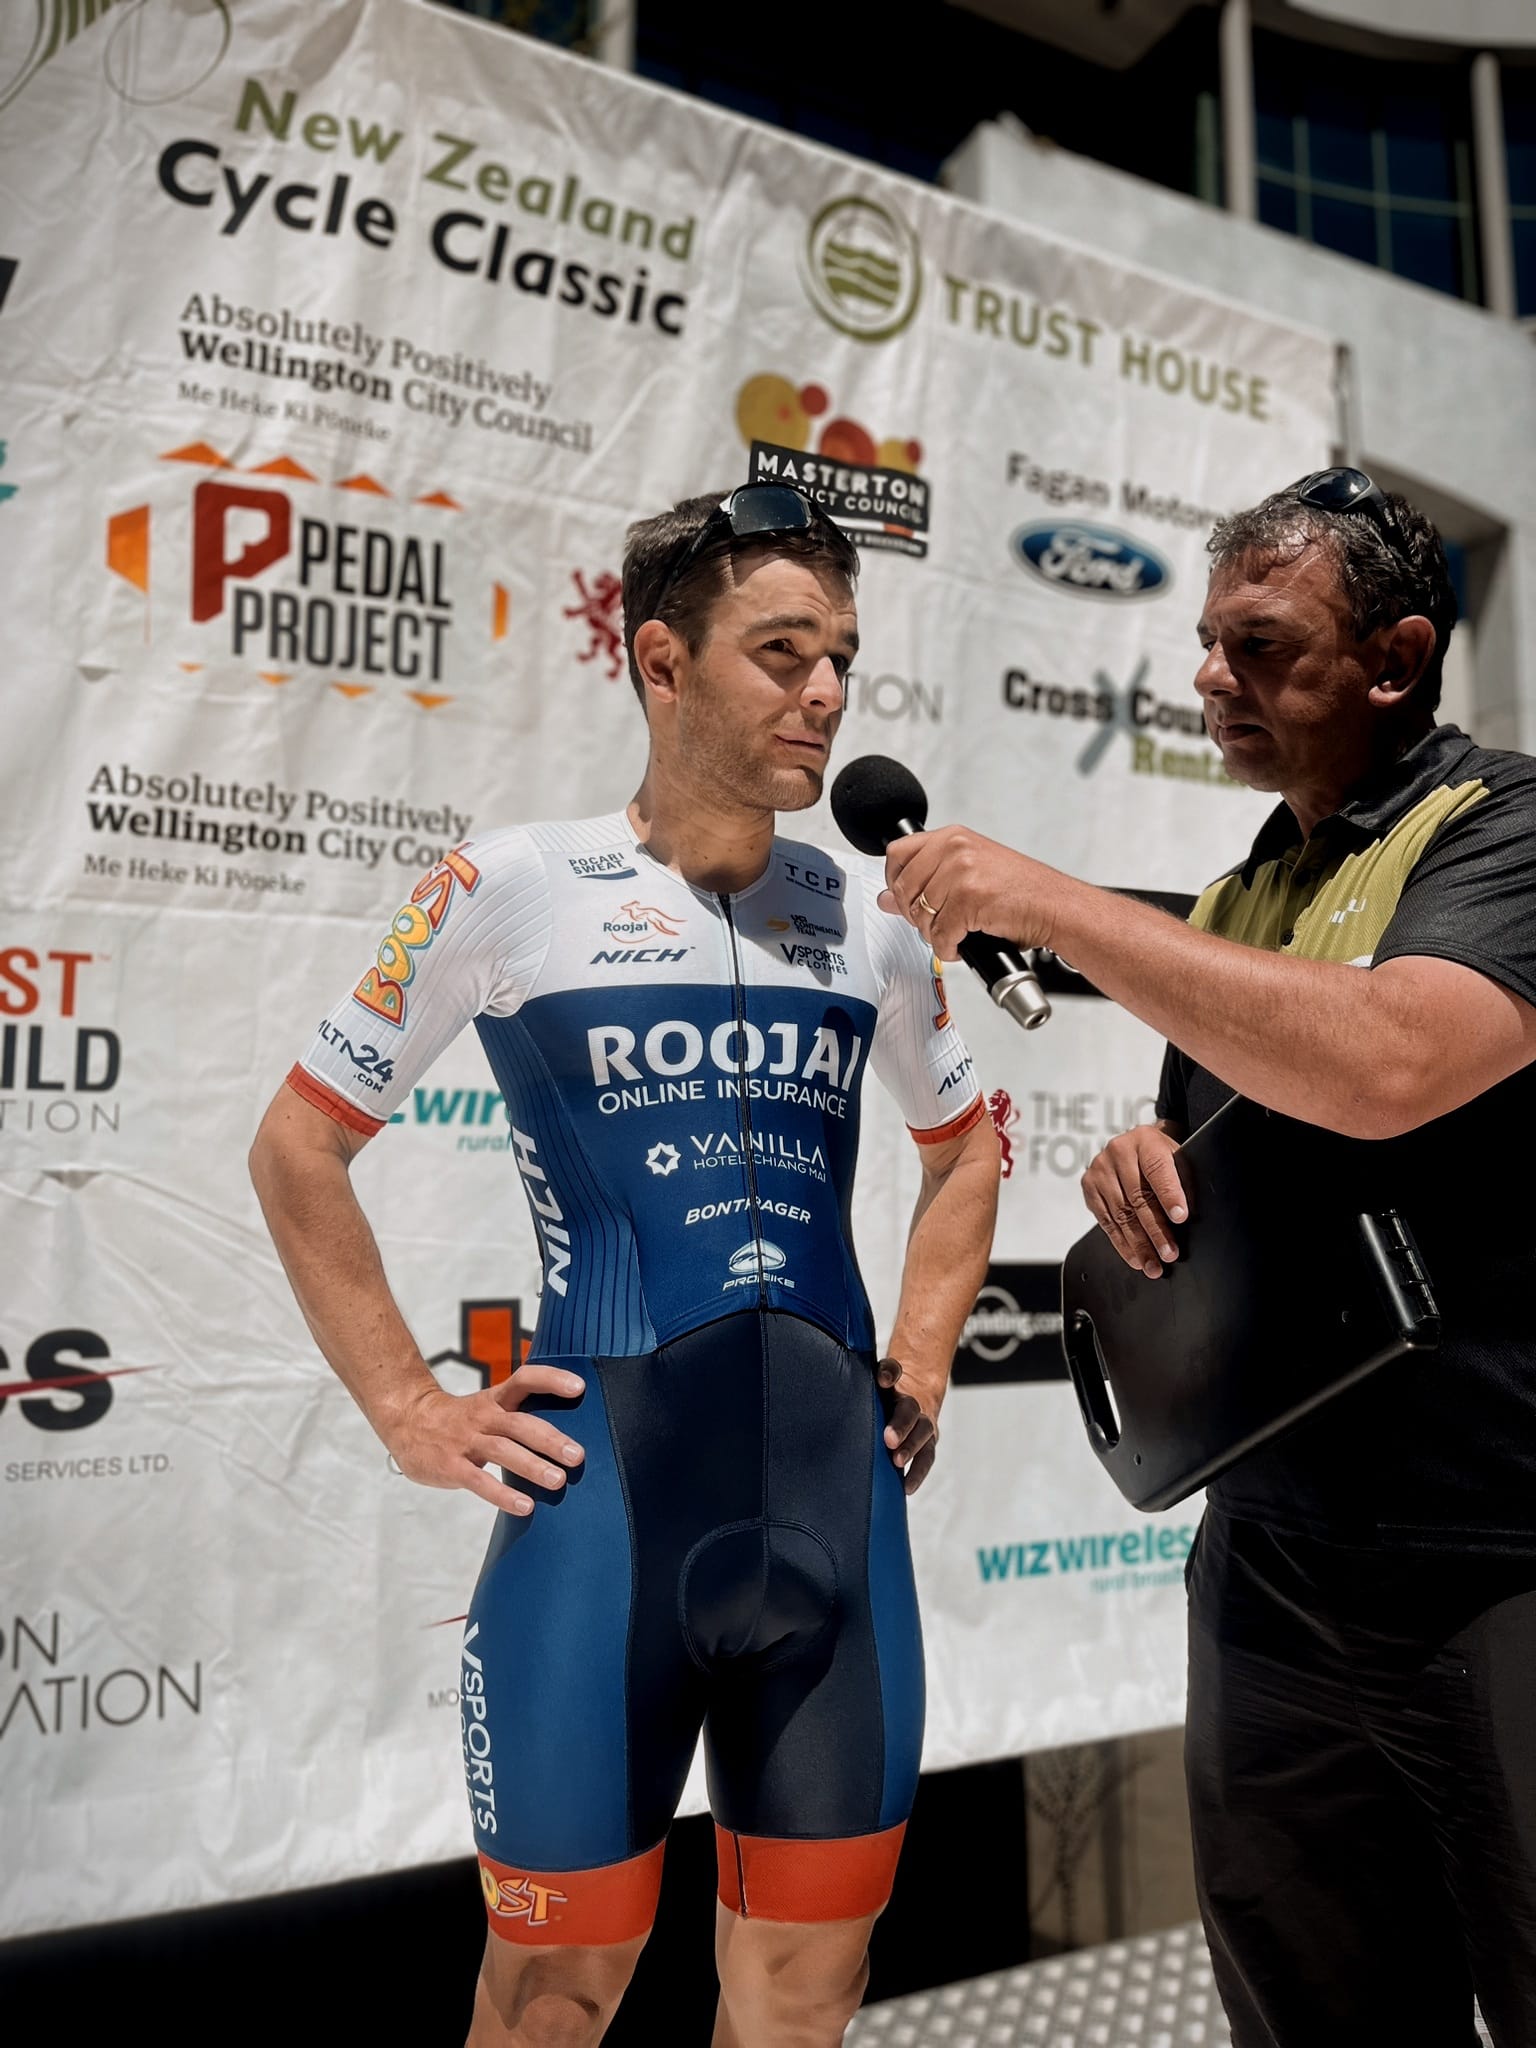 Lucas Roojai Insurance Team Win Stage5 New Zealand Cycle Classic 2023